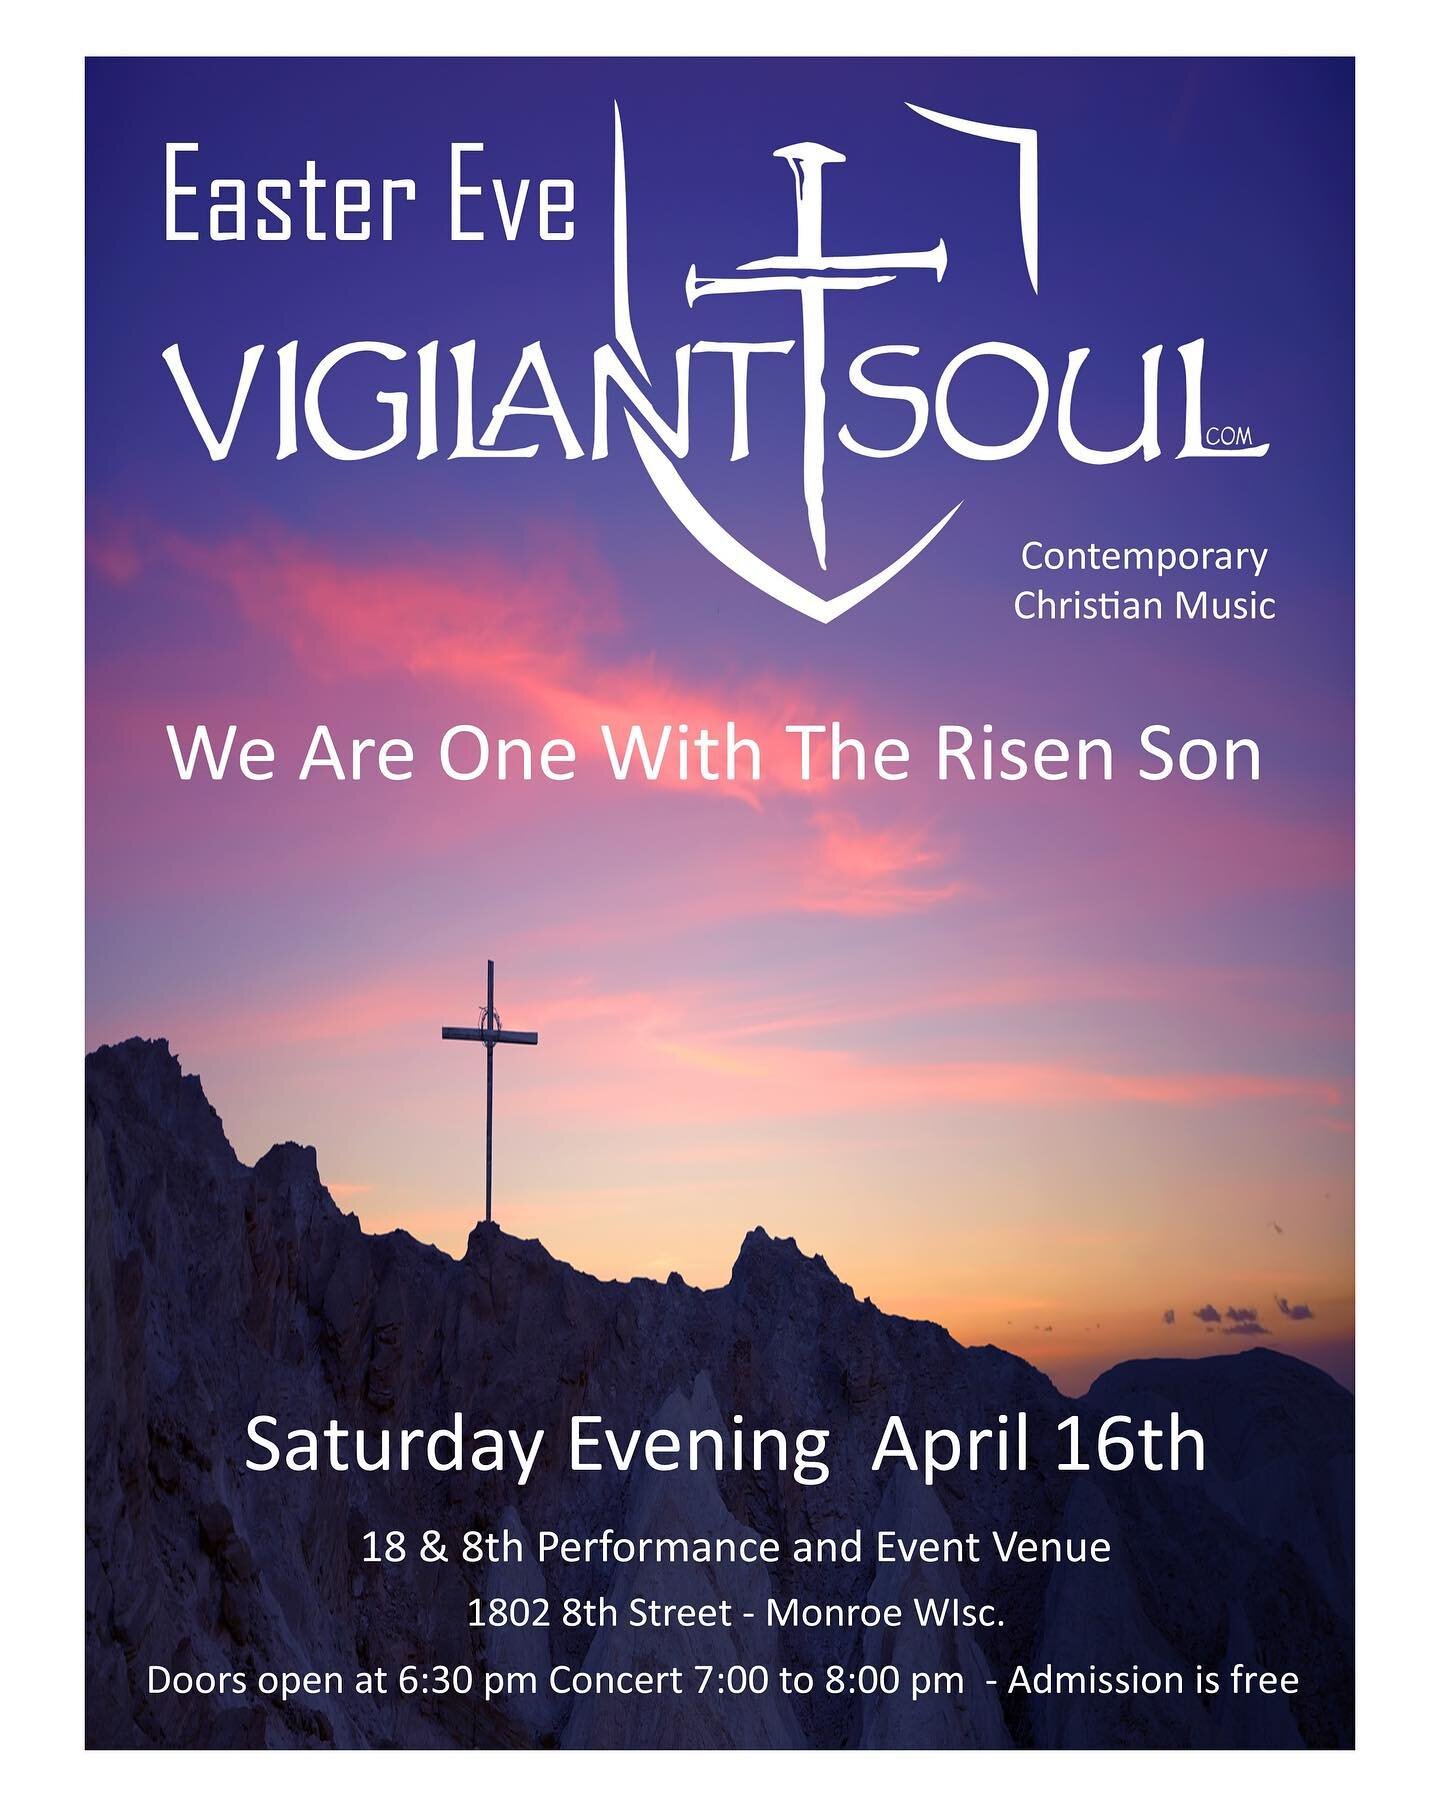 We are excited to be able to host a free Easter concert this year! Saturday, April 16th. Doors open at 6:30pm, concert at 7. 

We hope you can join us!